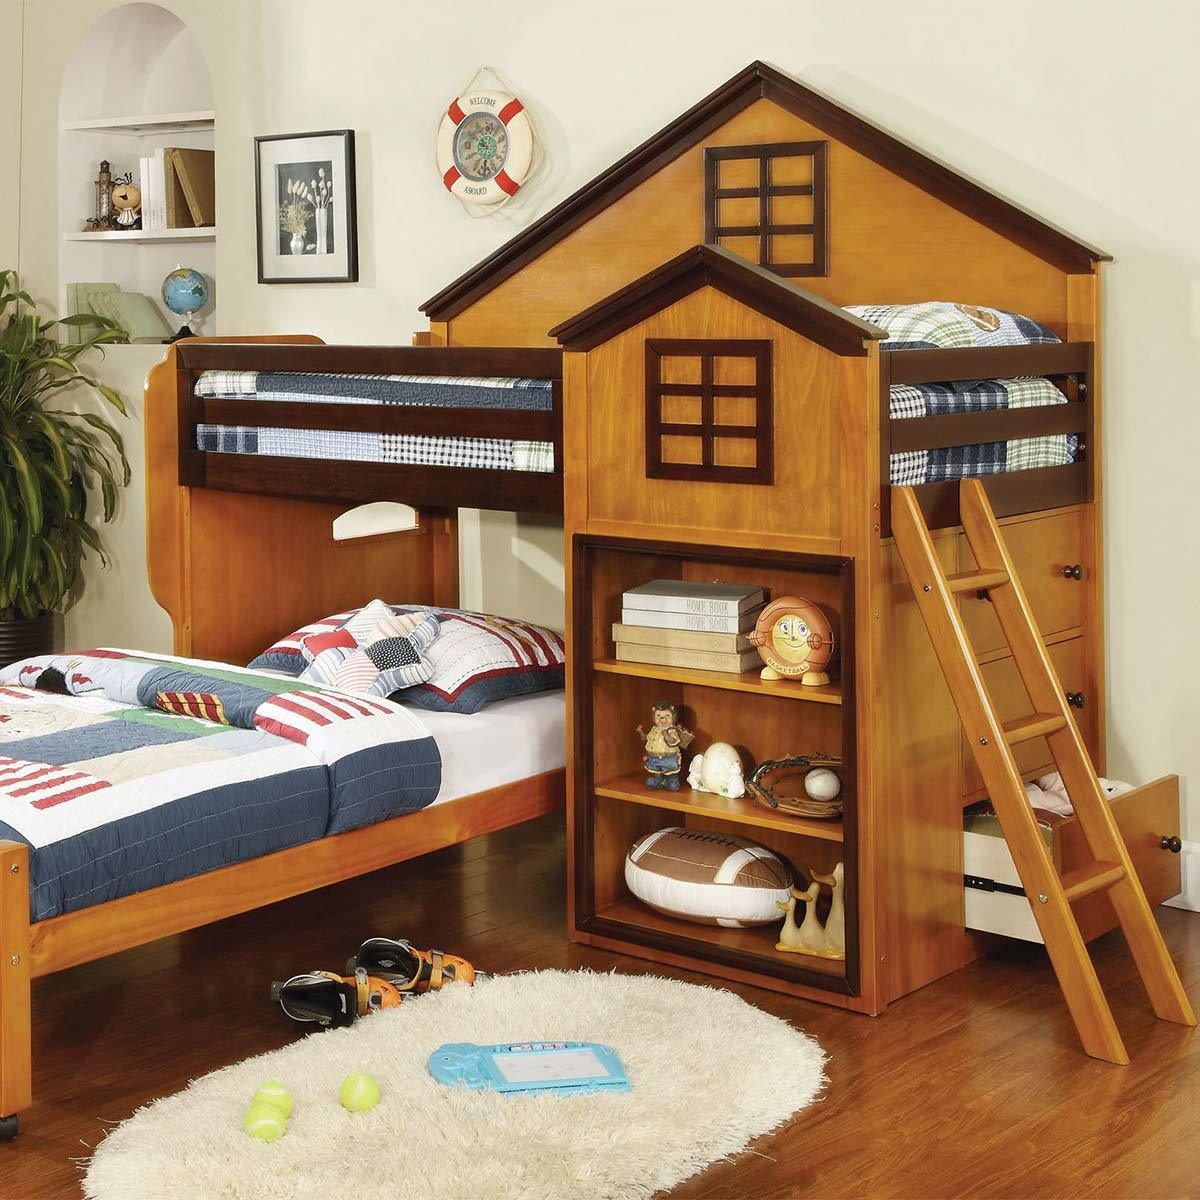 13 of the Coolest Bunk Beds You Can Buy Today